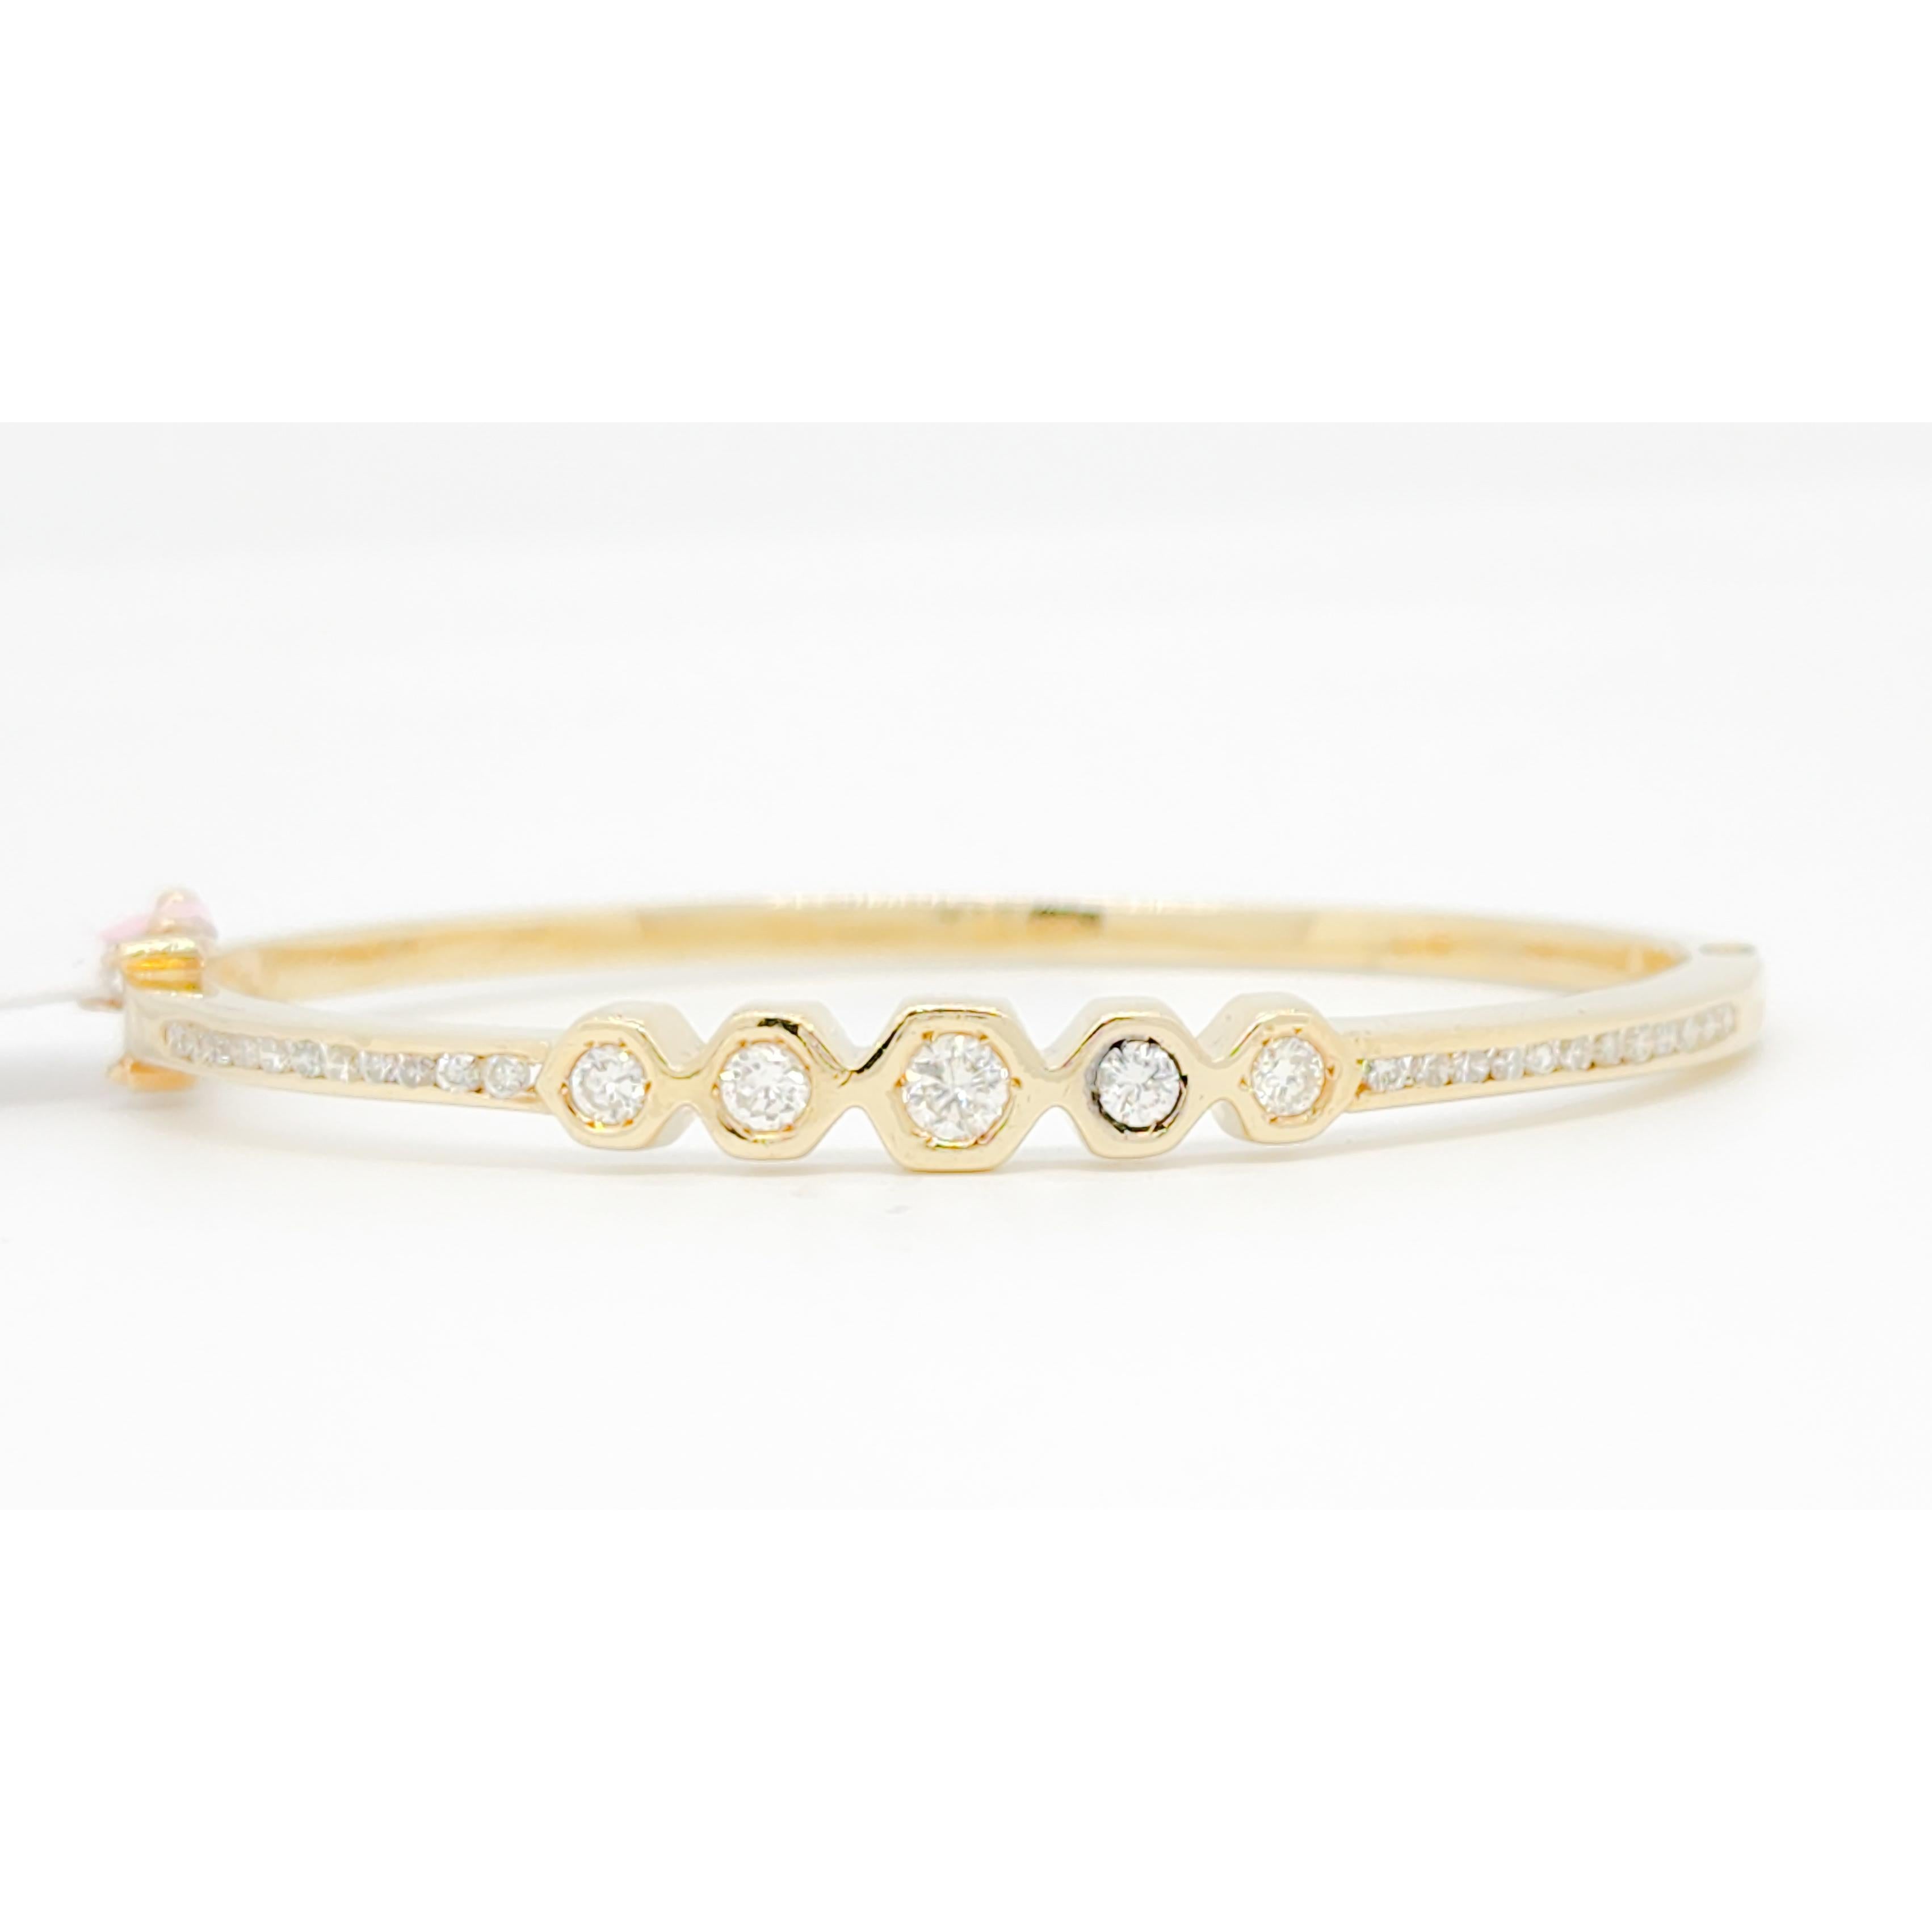 Beautiful bangle with 0.60 ct. good quality white diamond rounds.  Handmade in 14k yellow gold.